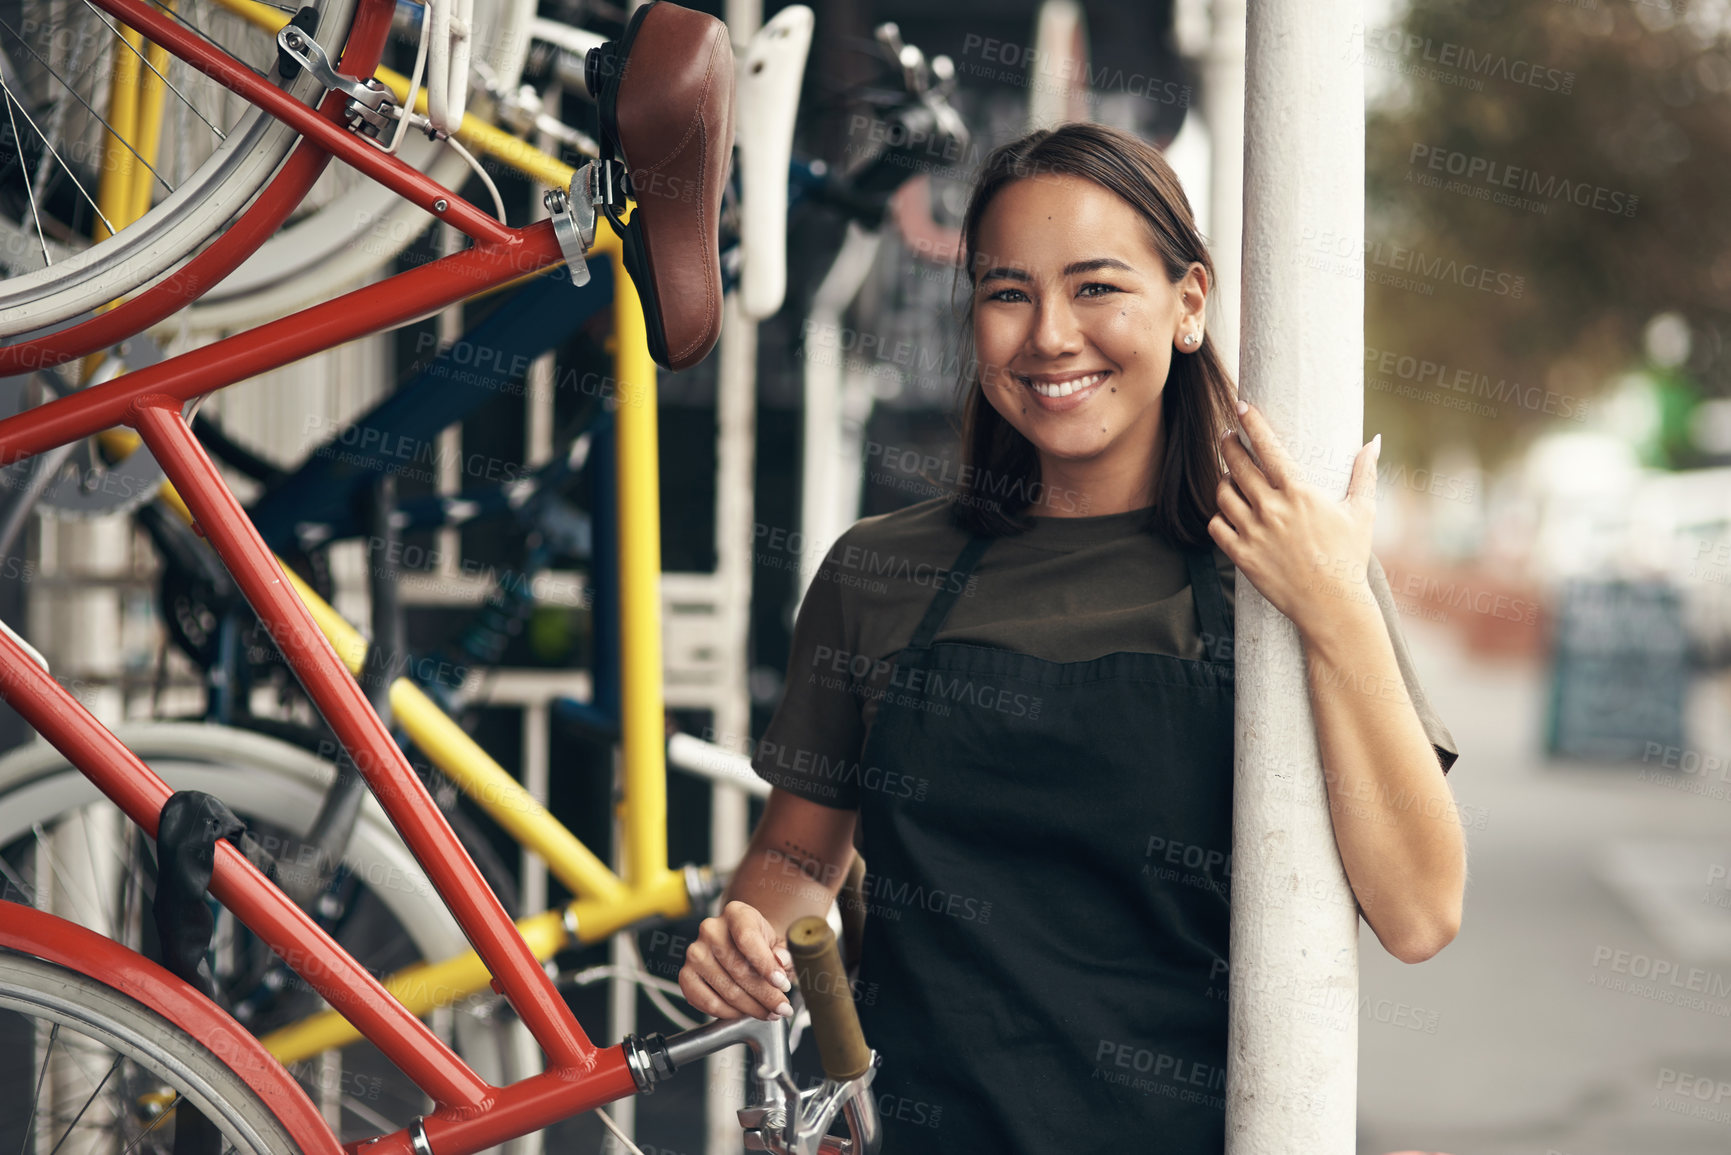 Buy stock photo Shot of an attractive young woman standing outside her bicycle shop during the day